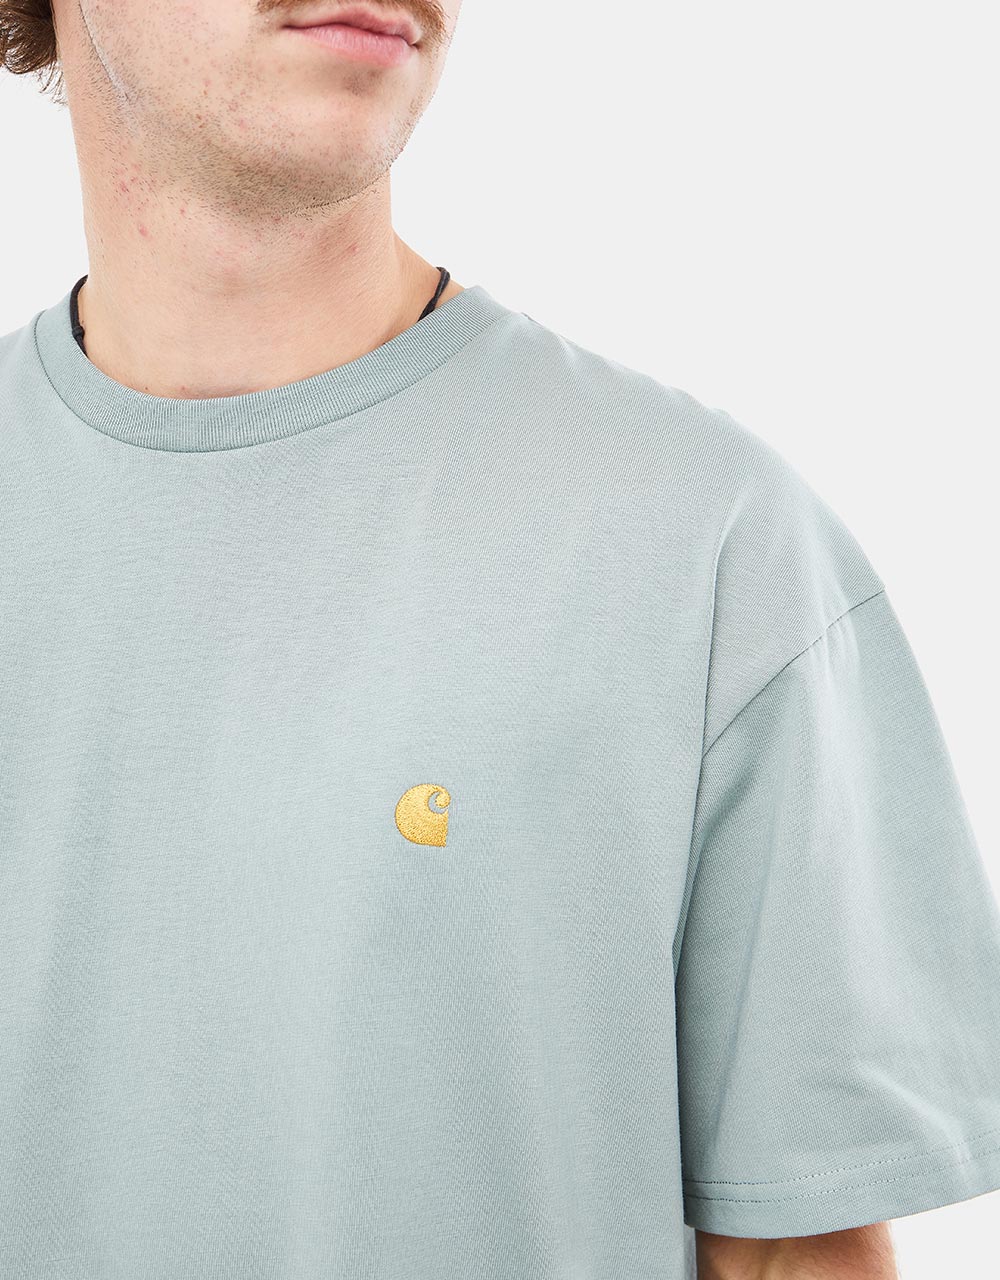 Carhartt WIP Chase T-Shirt - Glassy Teal/Gold